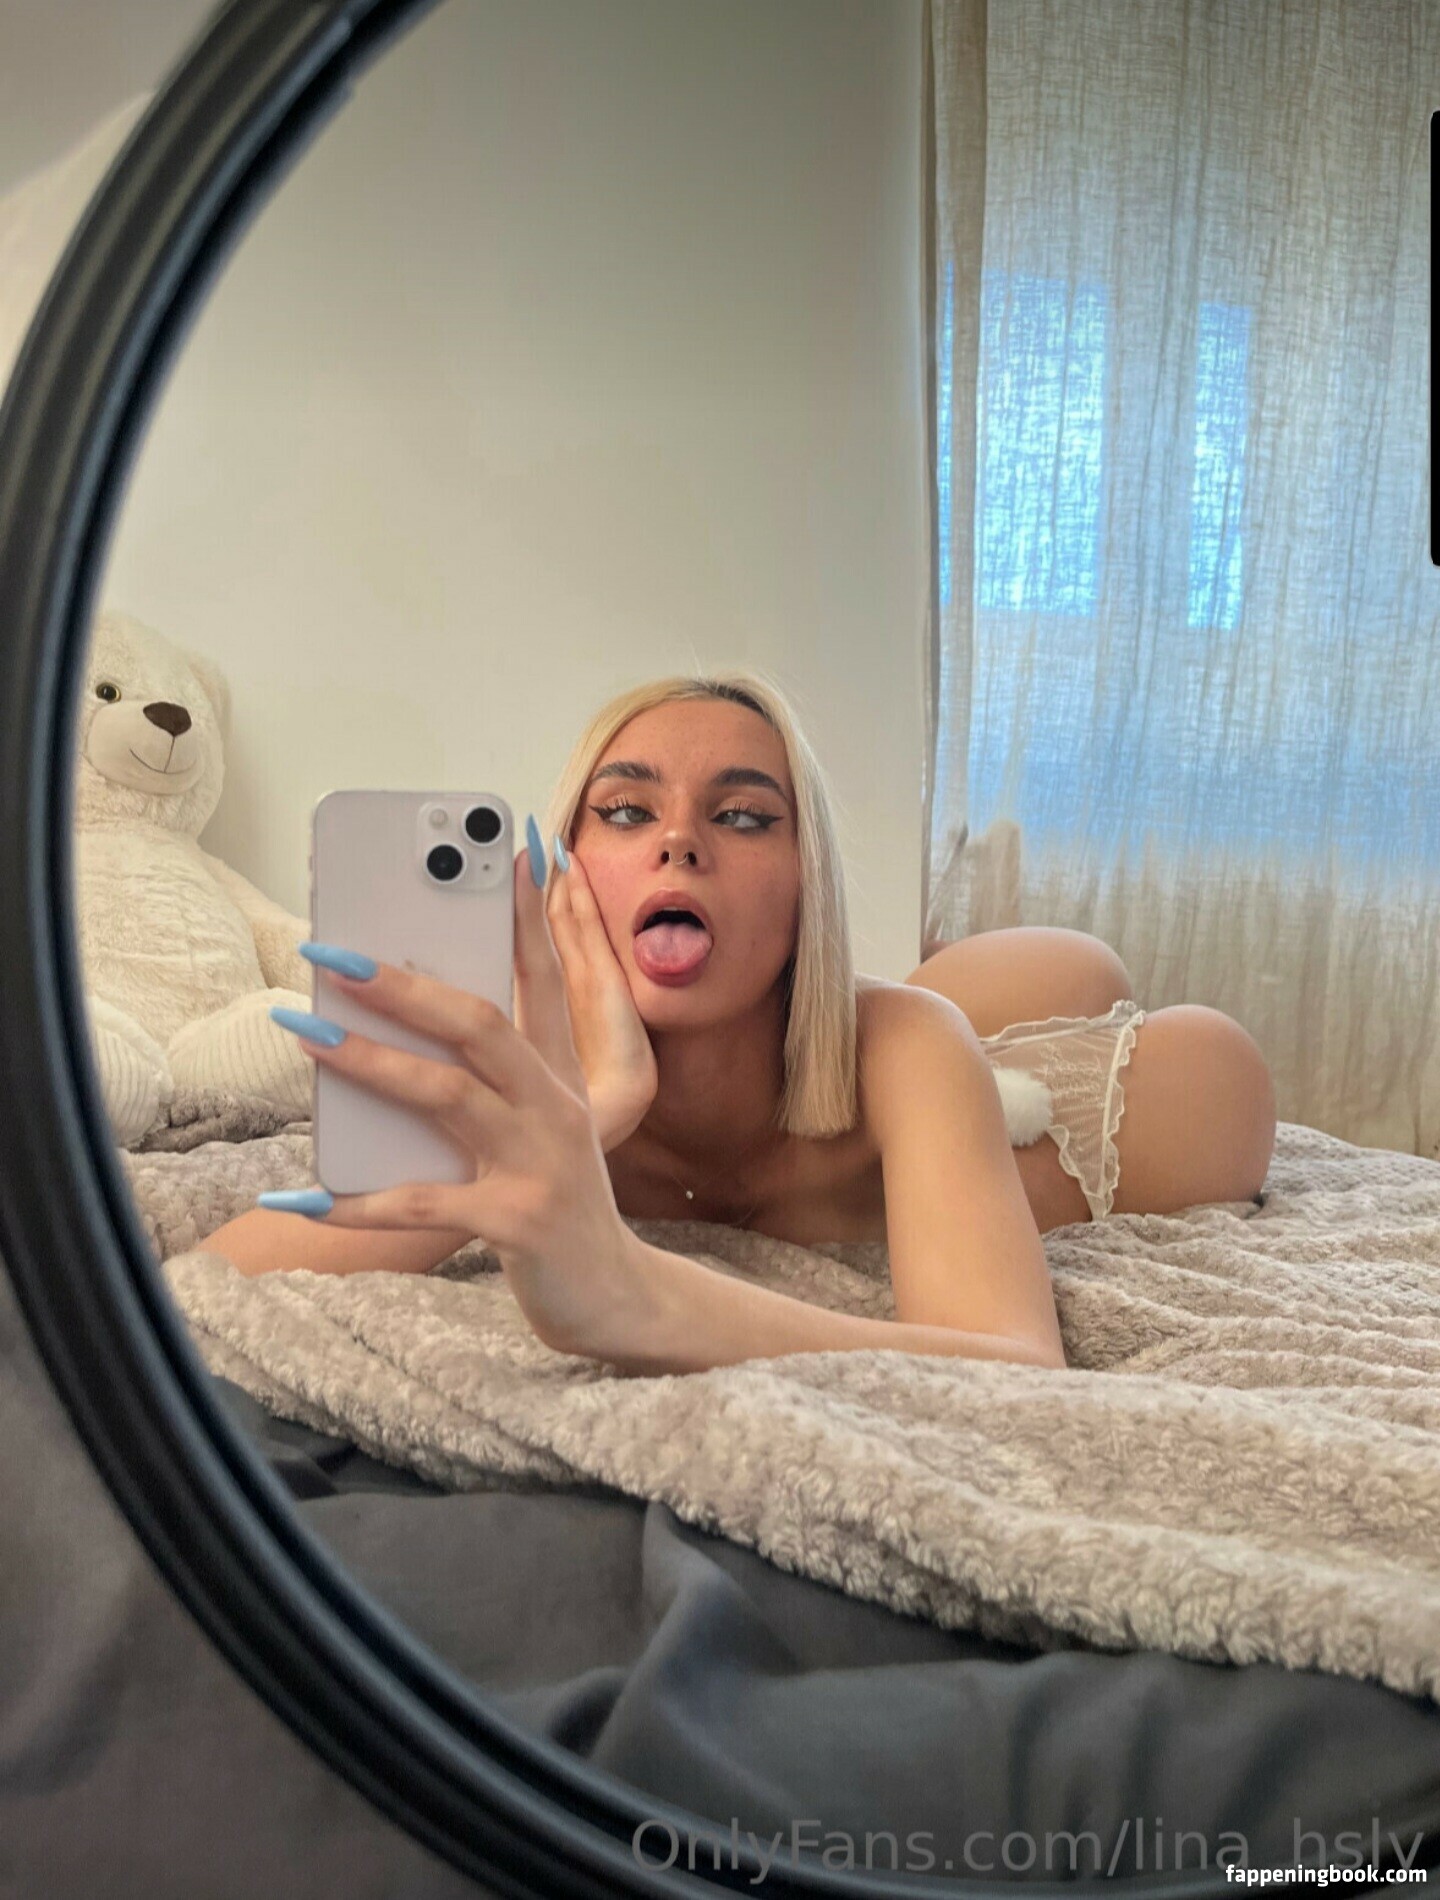 Lina Hsly Nude